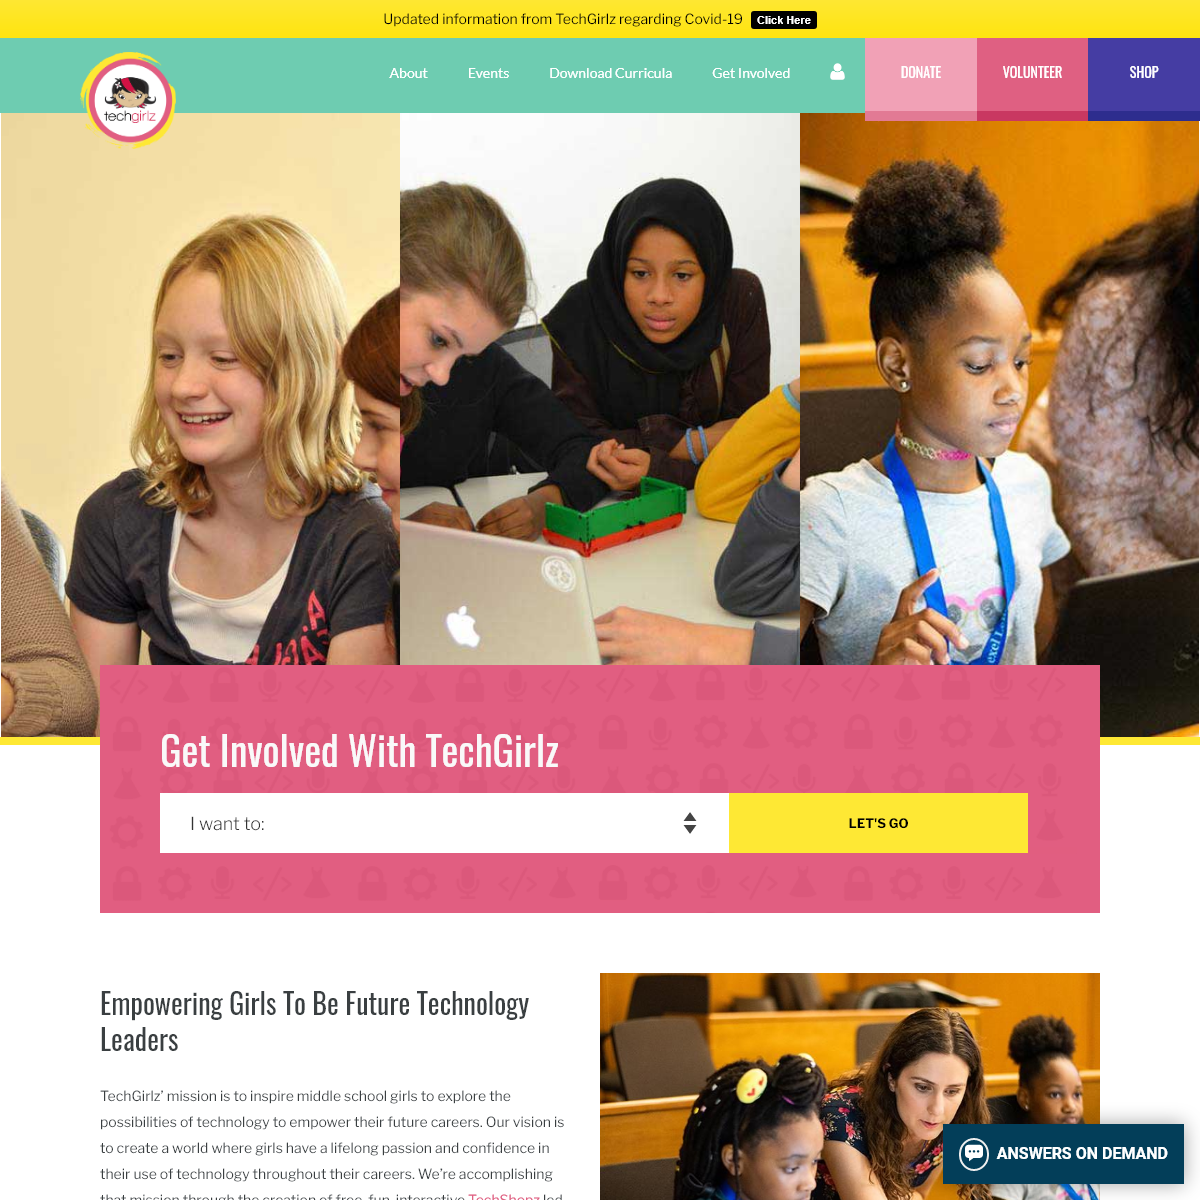 A complete backup of techgirlz.org